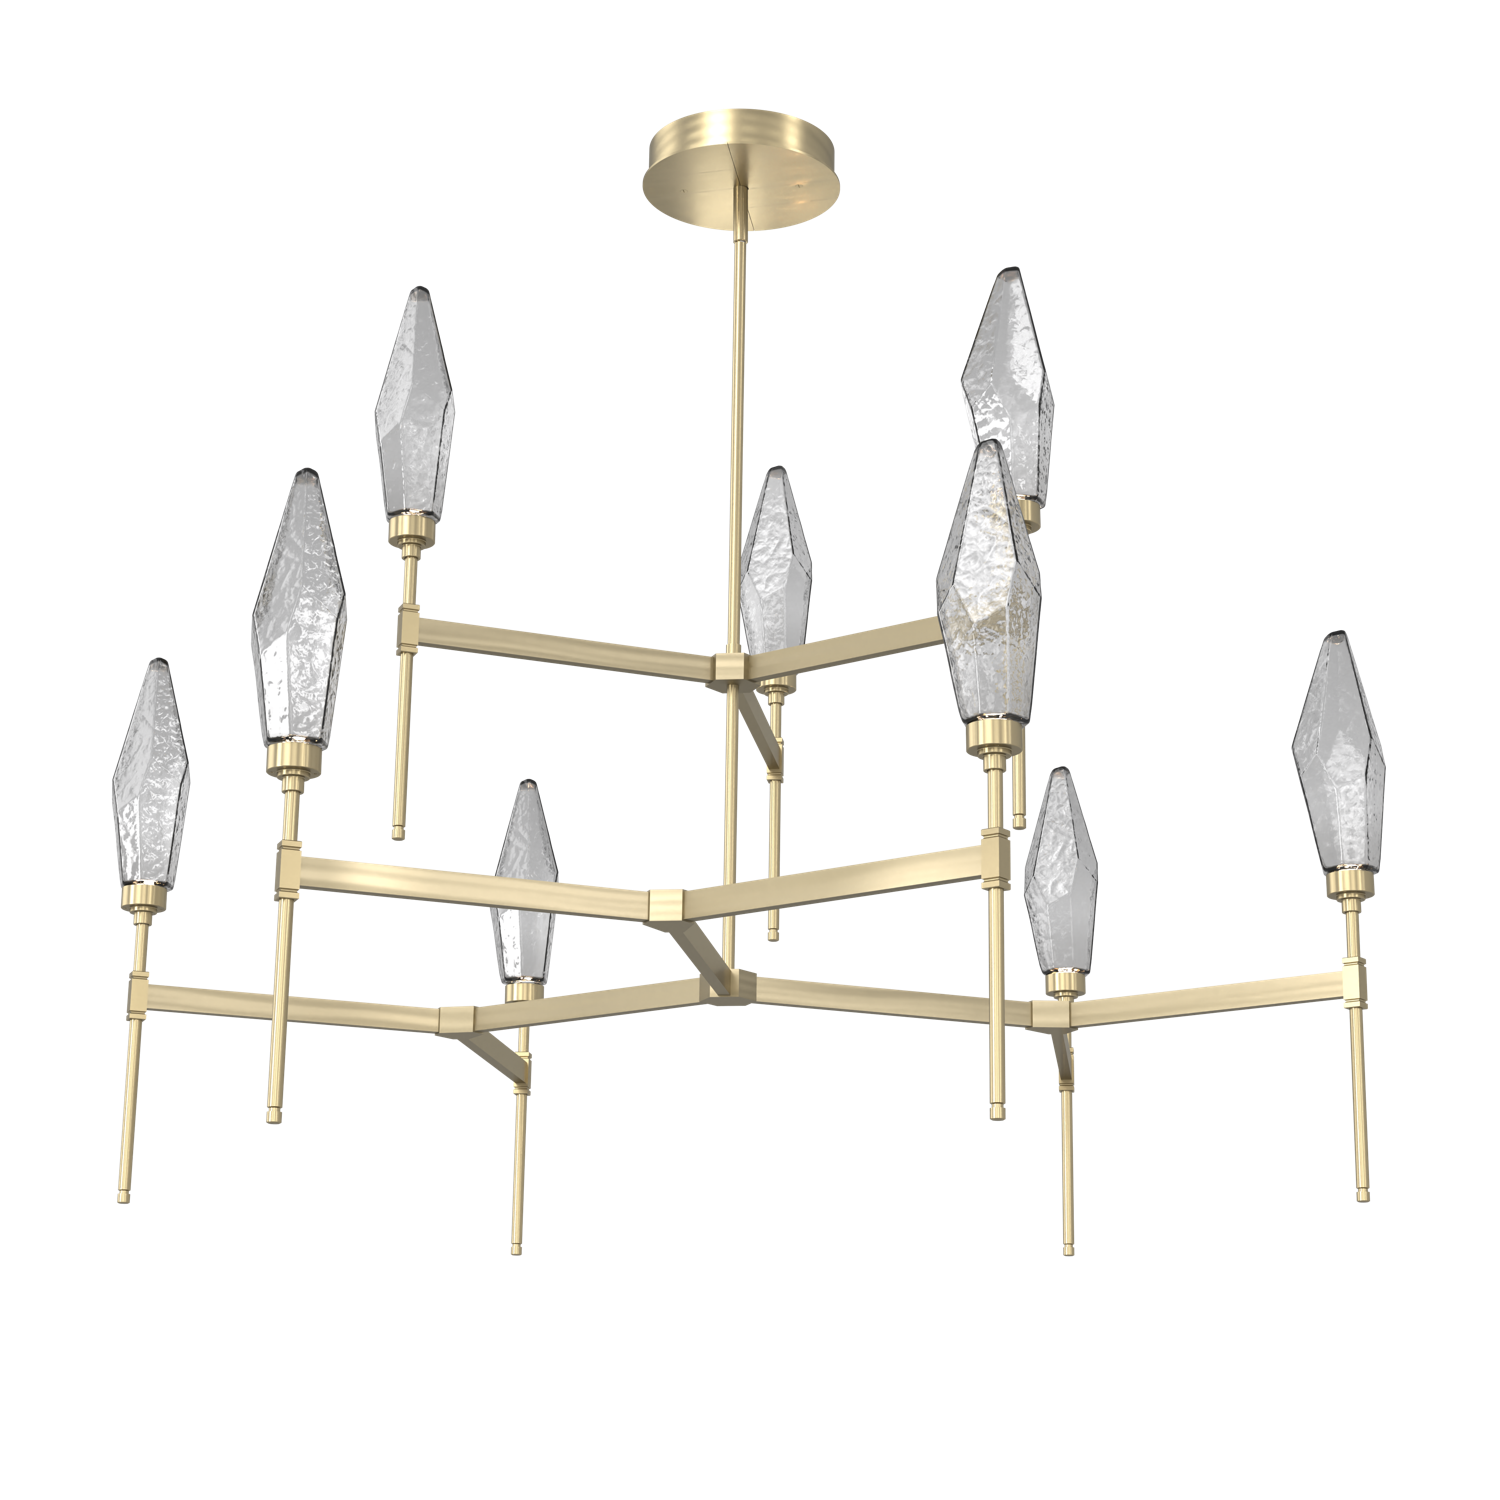 CHB0050-54-HB-CS-Hammerton-Studio-Rock-Crystal-54-inch-round-two-tier-belvedere-chandelier-with-heritage-brass-finish-and-chilled-smoke-glass-shades-and-LED-lamping